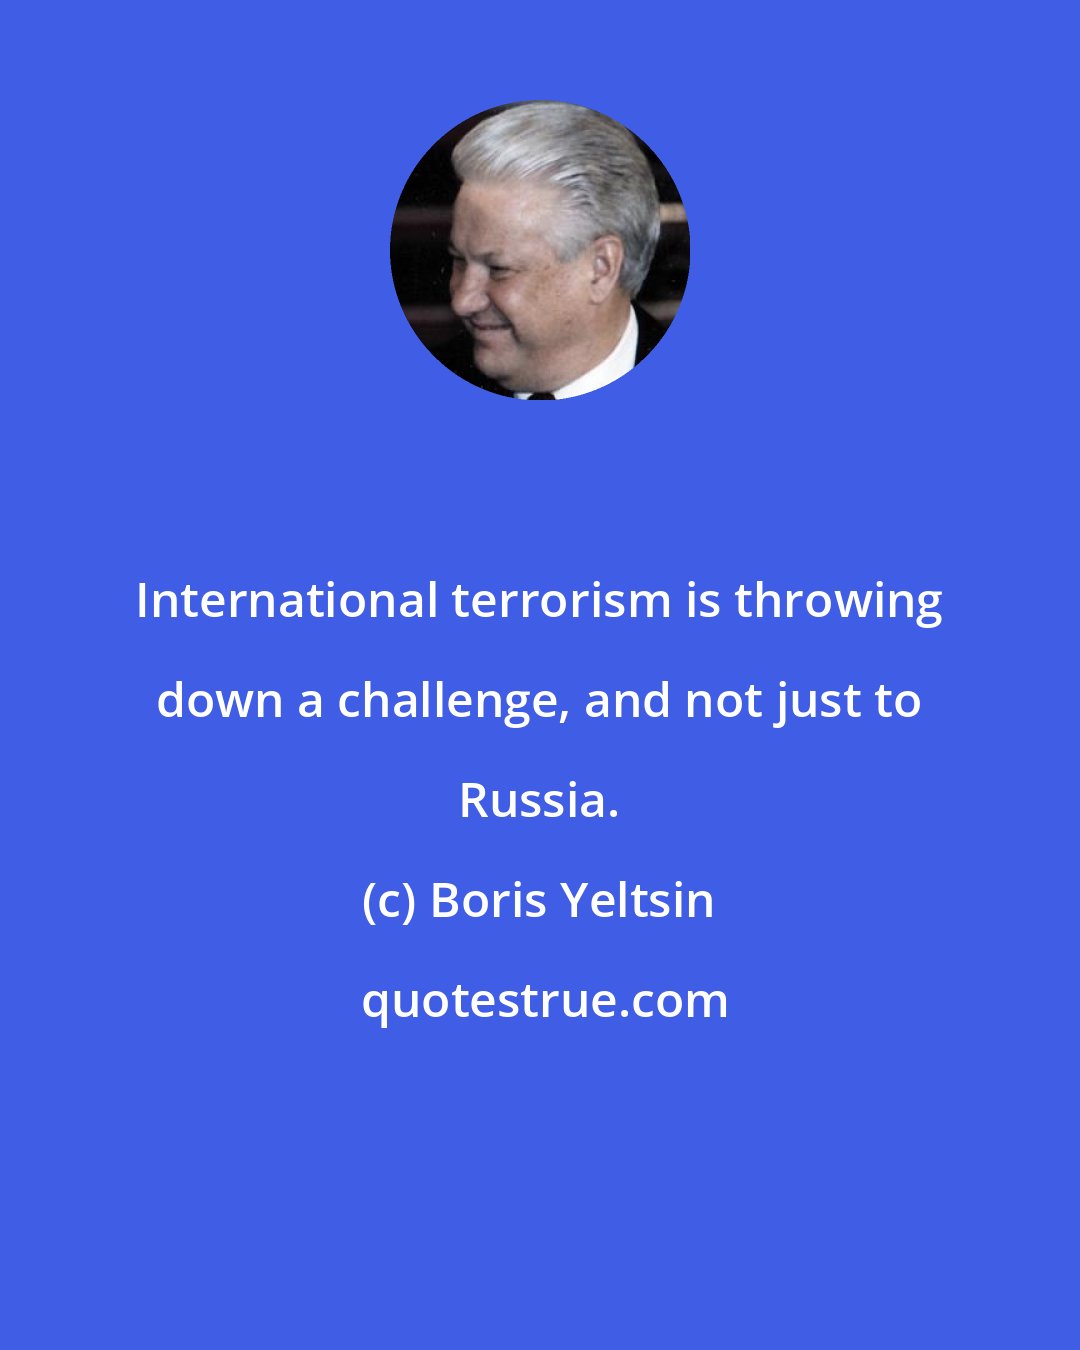 Boris Yeltsin: International terrorism is throwing down a challenge, and not just to Russia.